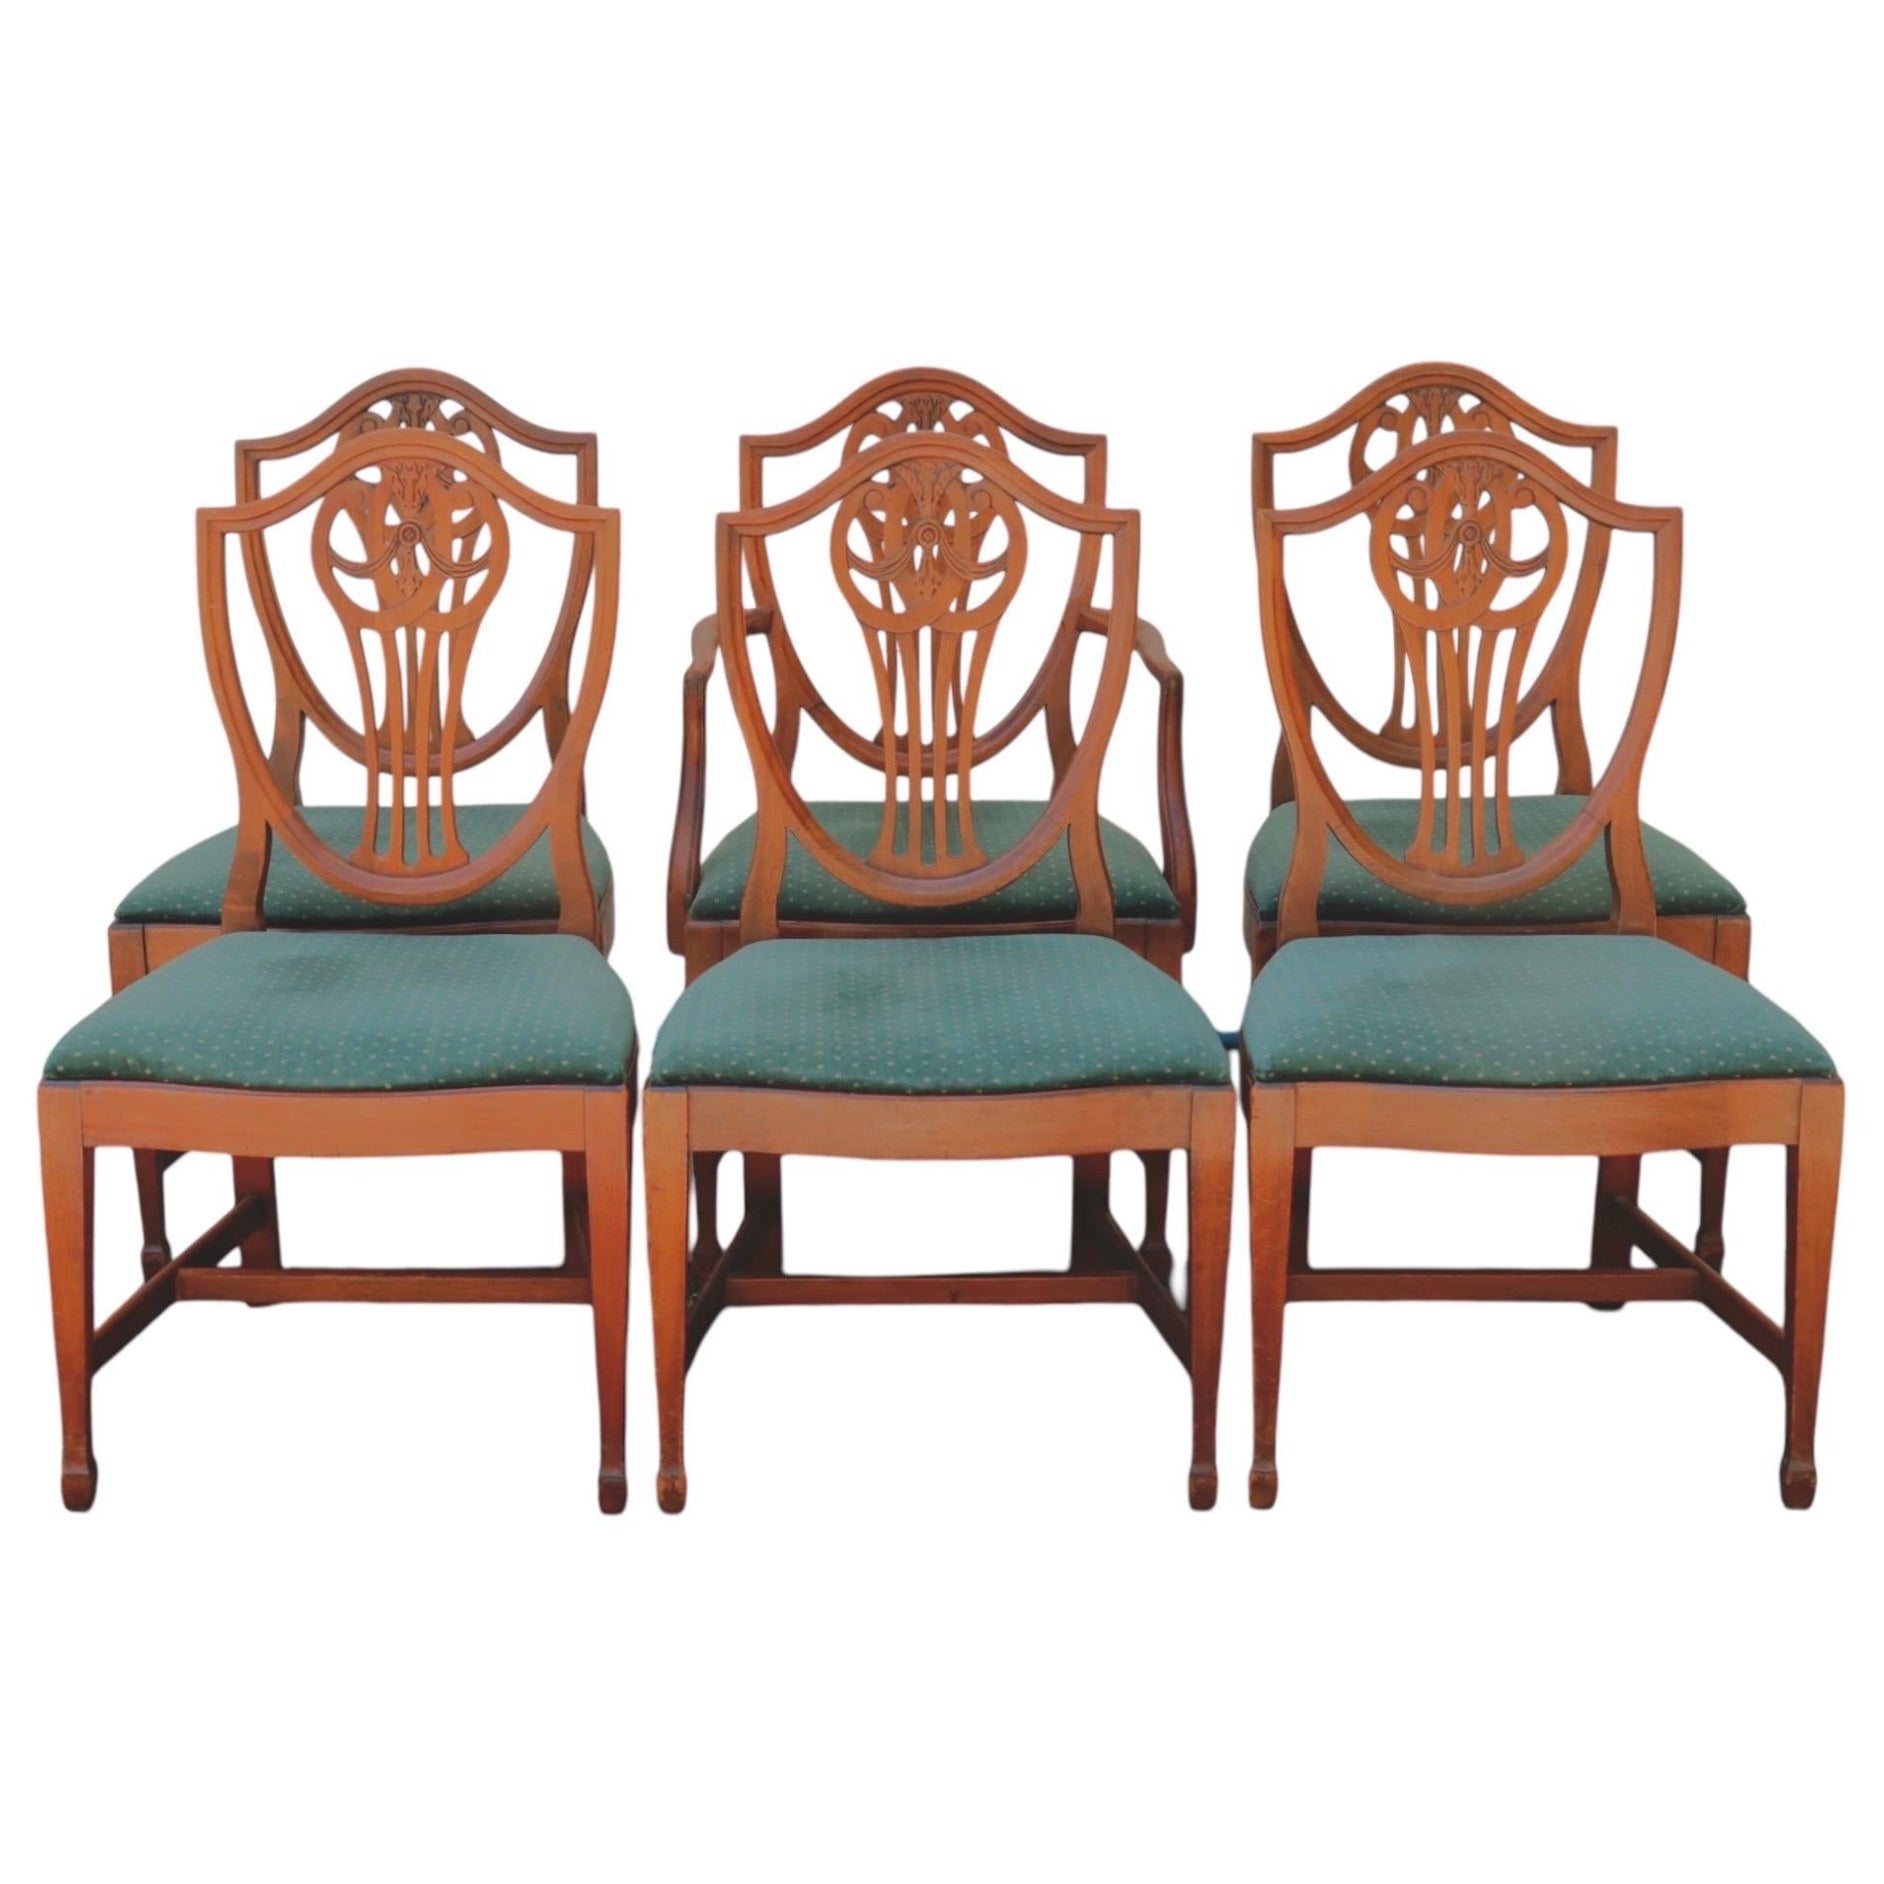 1937 Macys Shield Back Dining Chairs - Set of 6 For Sale